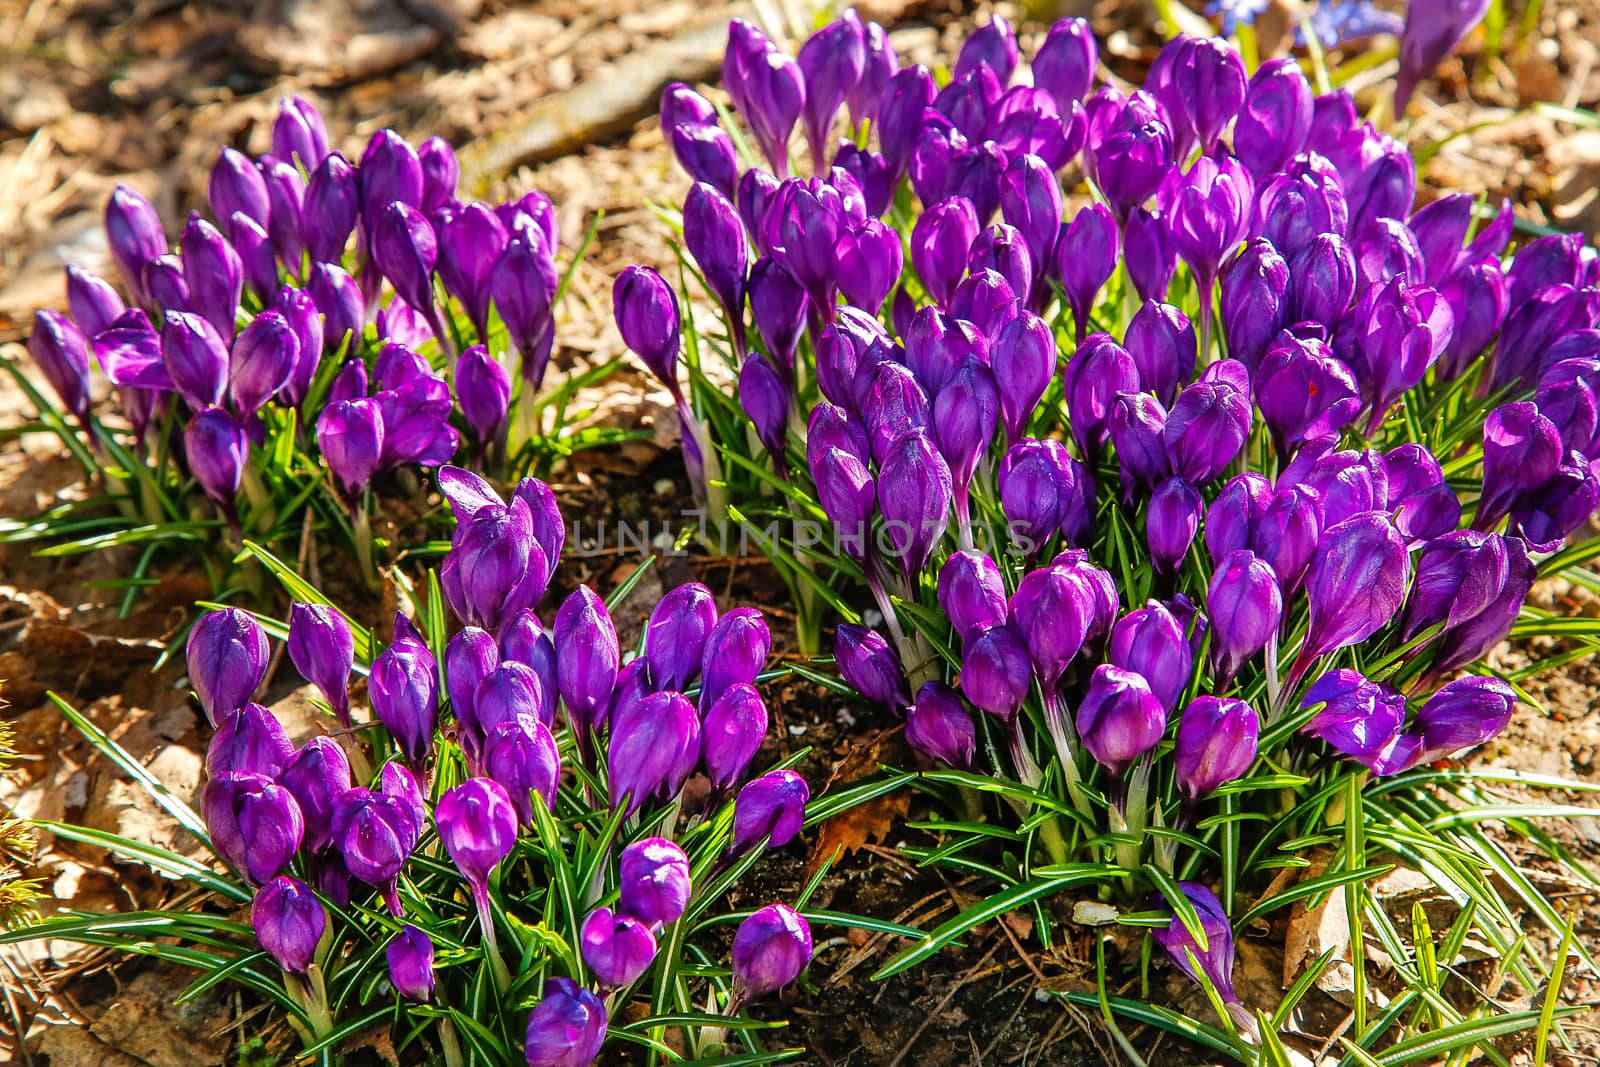 The first flowers of purple Crocus blossomed in early spring